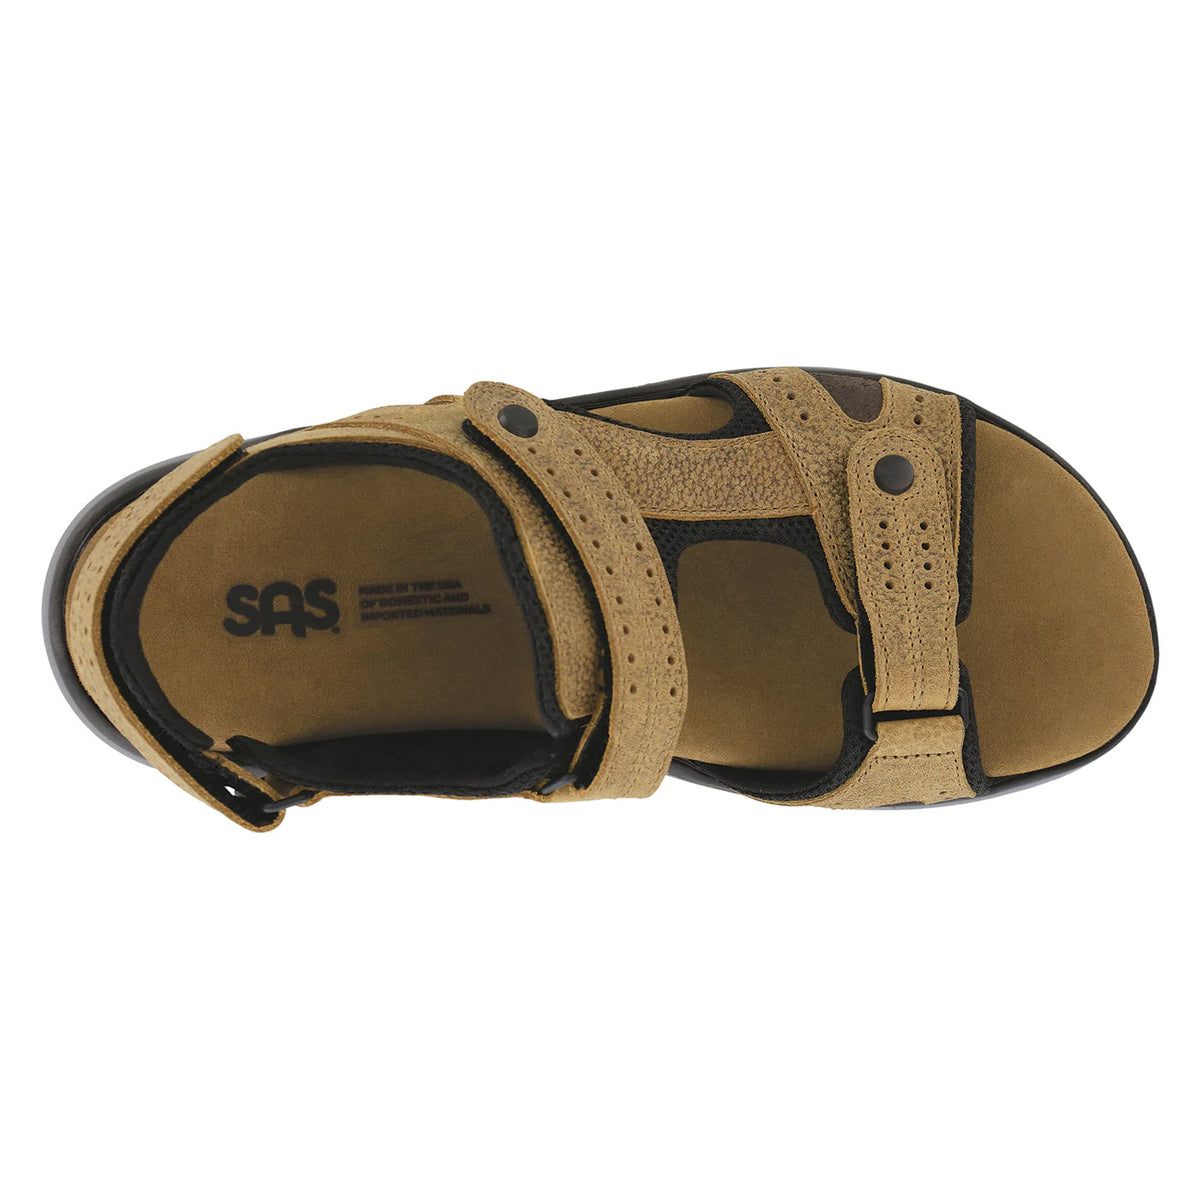 Top view of a tan SAS MAVERICK SANDAL STAMPEDE SAND - MENS with black accents, featuring adjustable straps and a visible &quot;SAS&quot; logo on the cushioned insole.